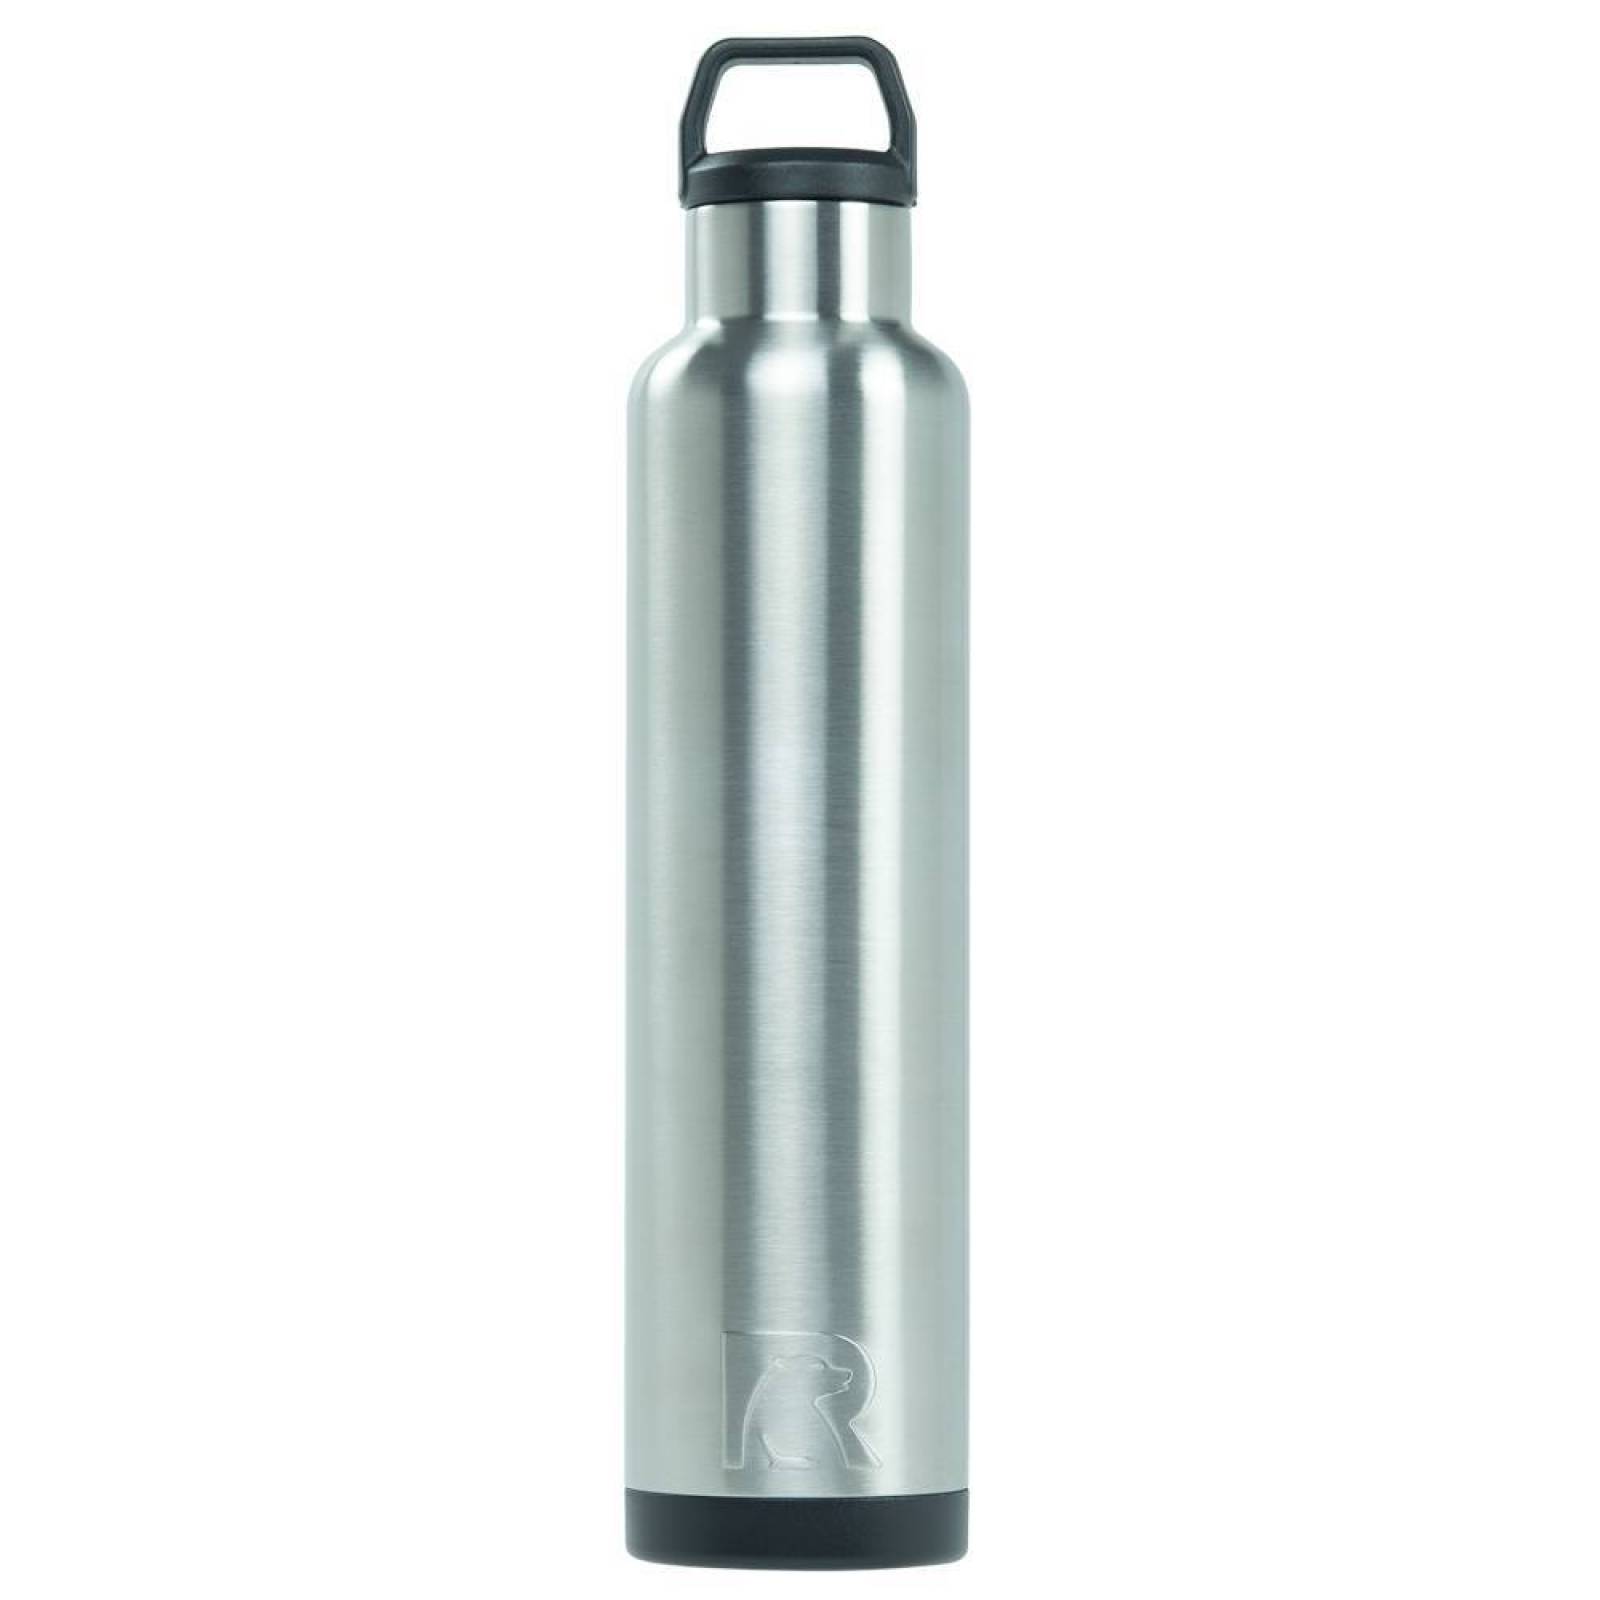 RTIC Water Bottle 26 oz. Stainless   915